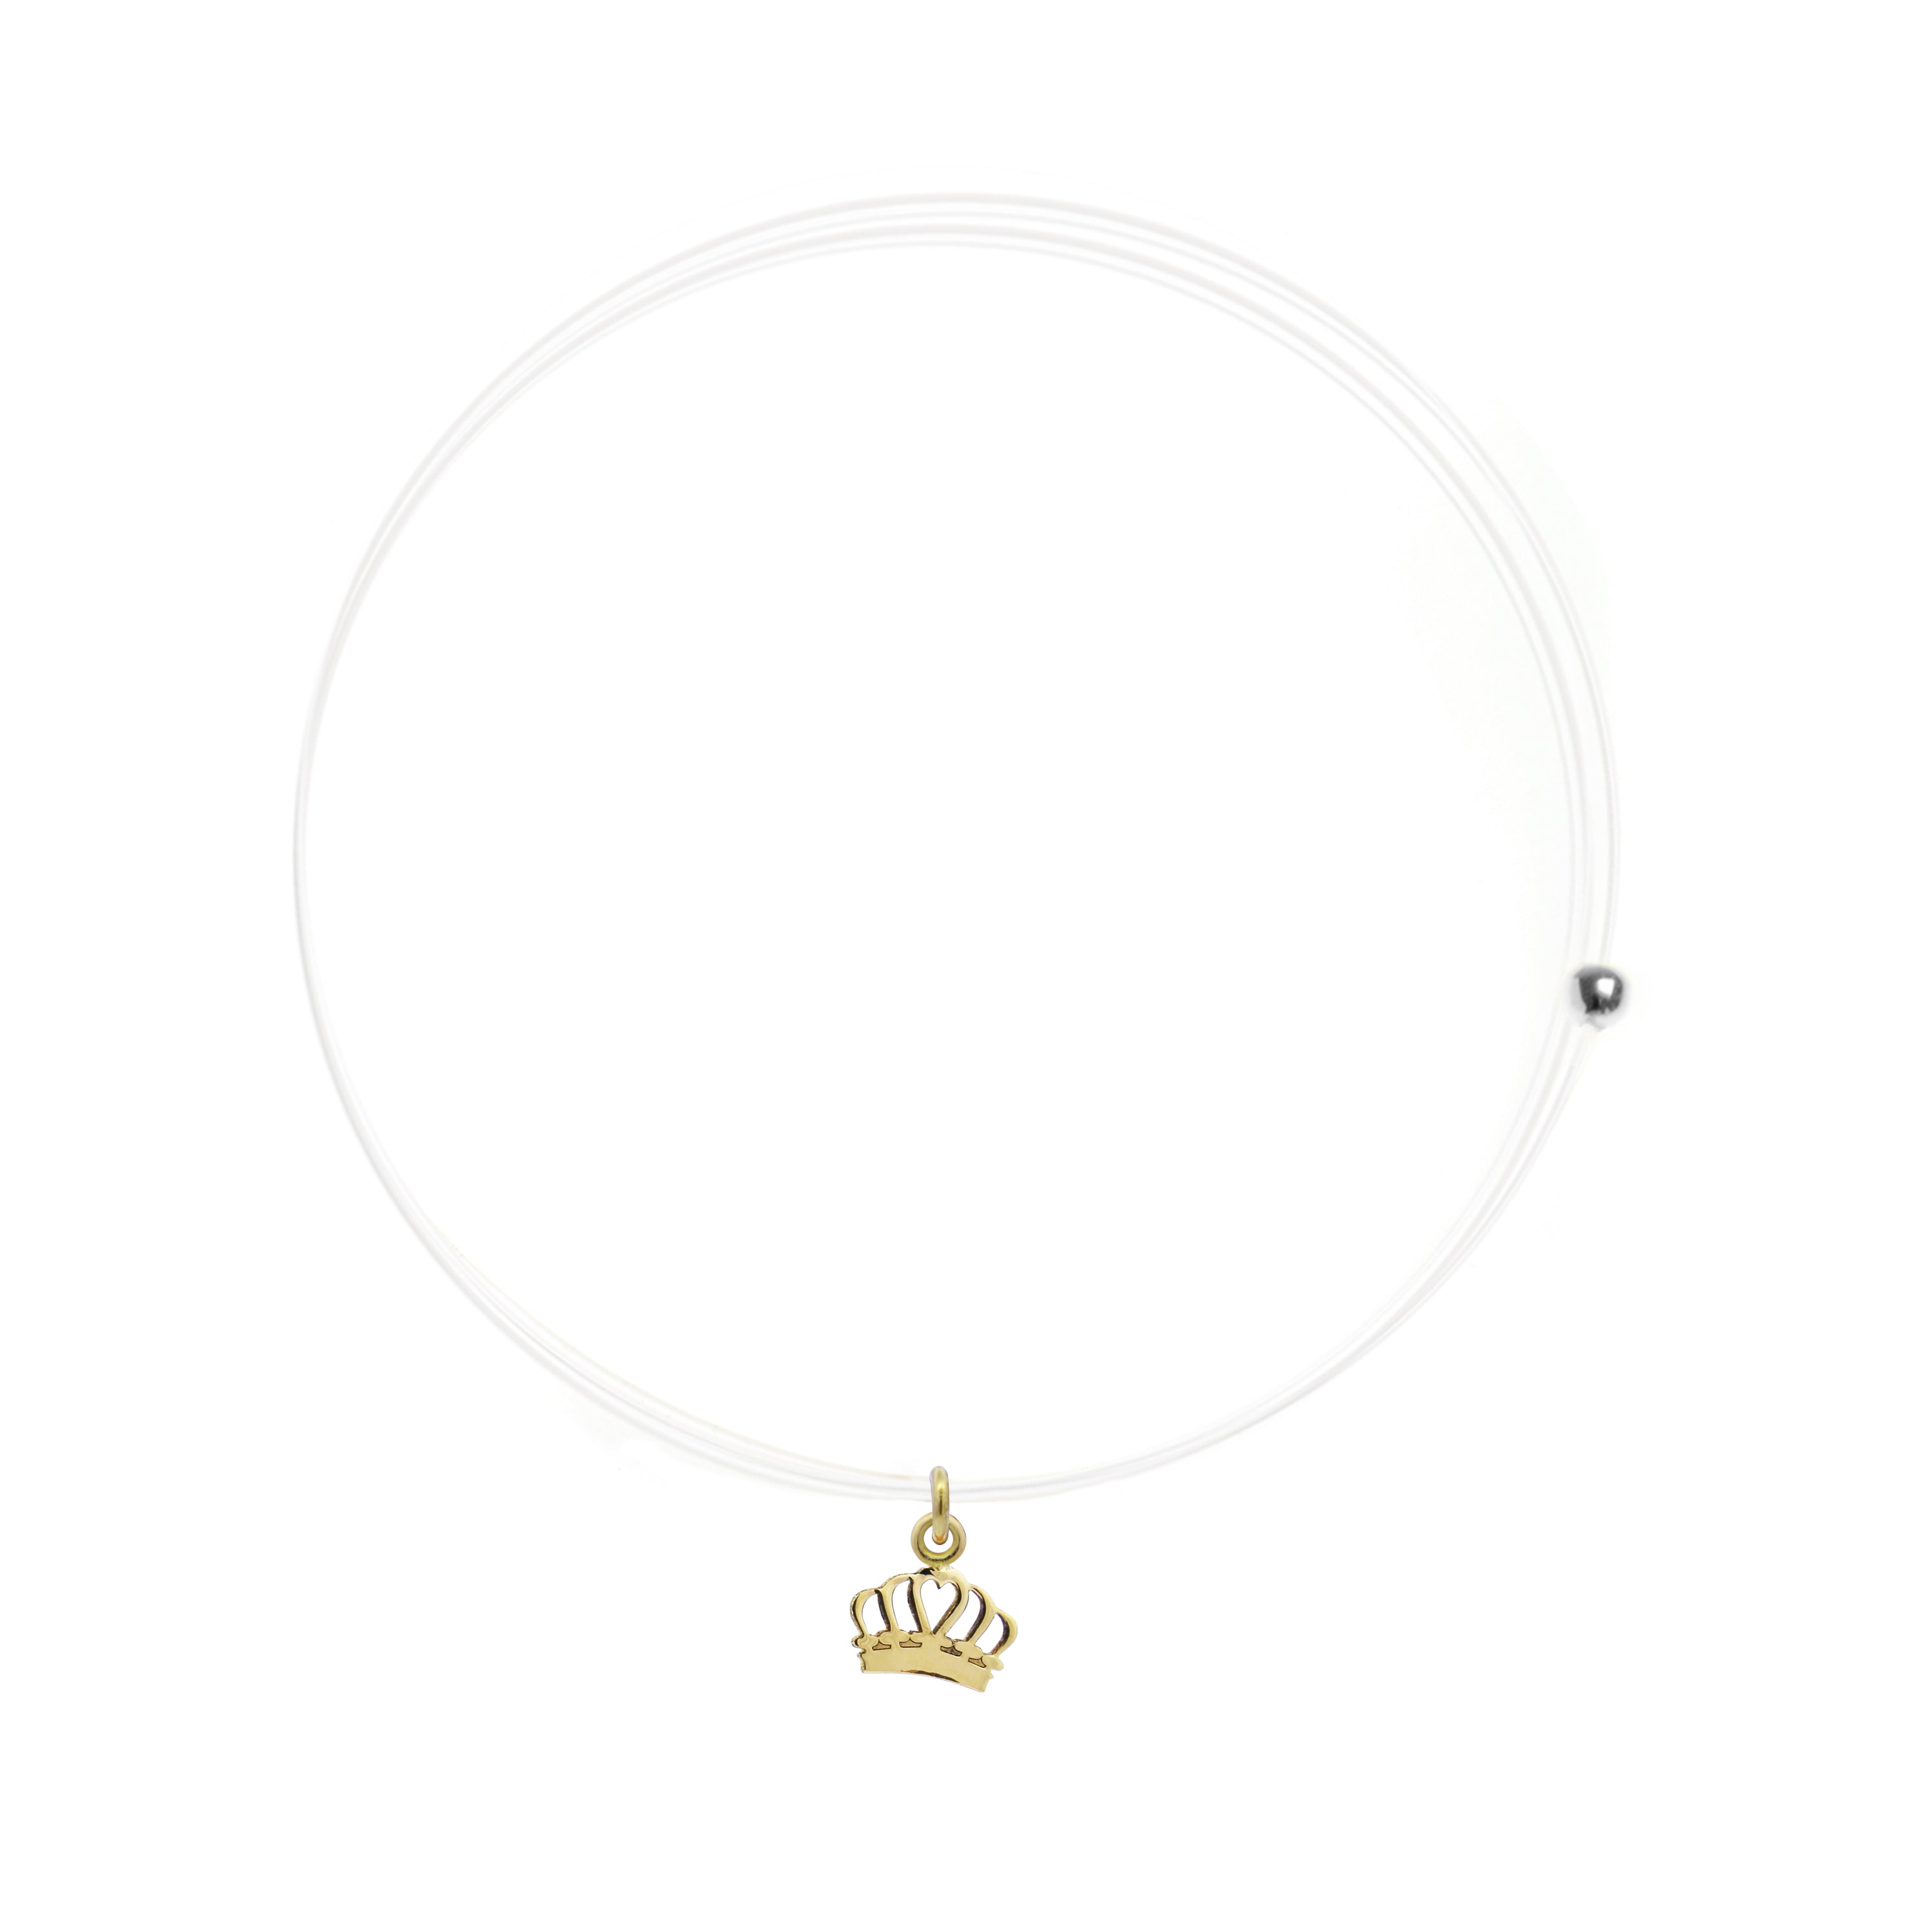 Chokers - Choker invisibile line with crown - ORO18KT - 1 | Rue des Mille